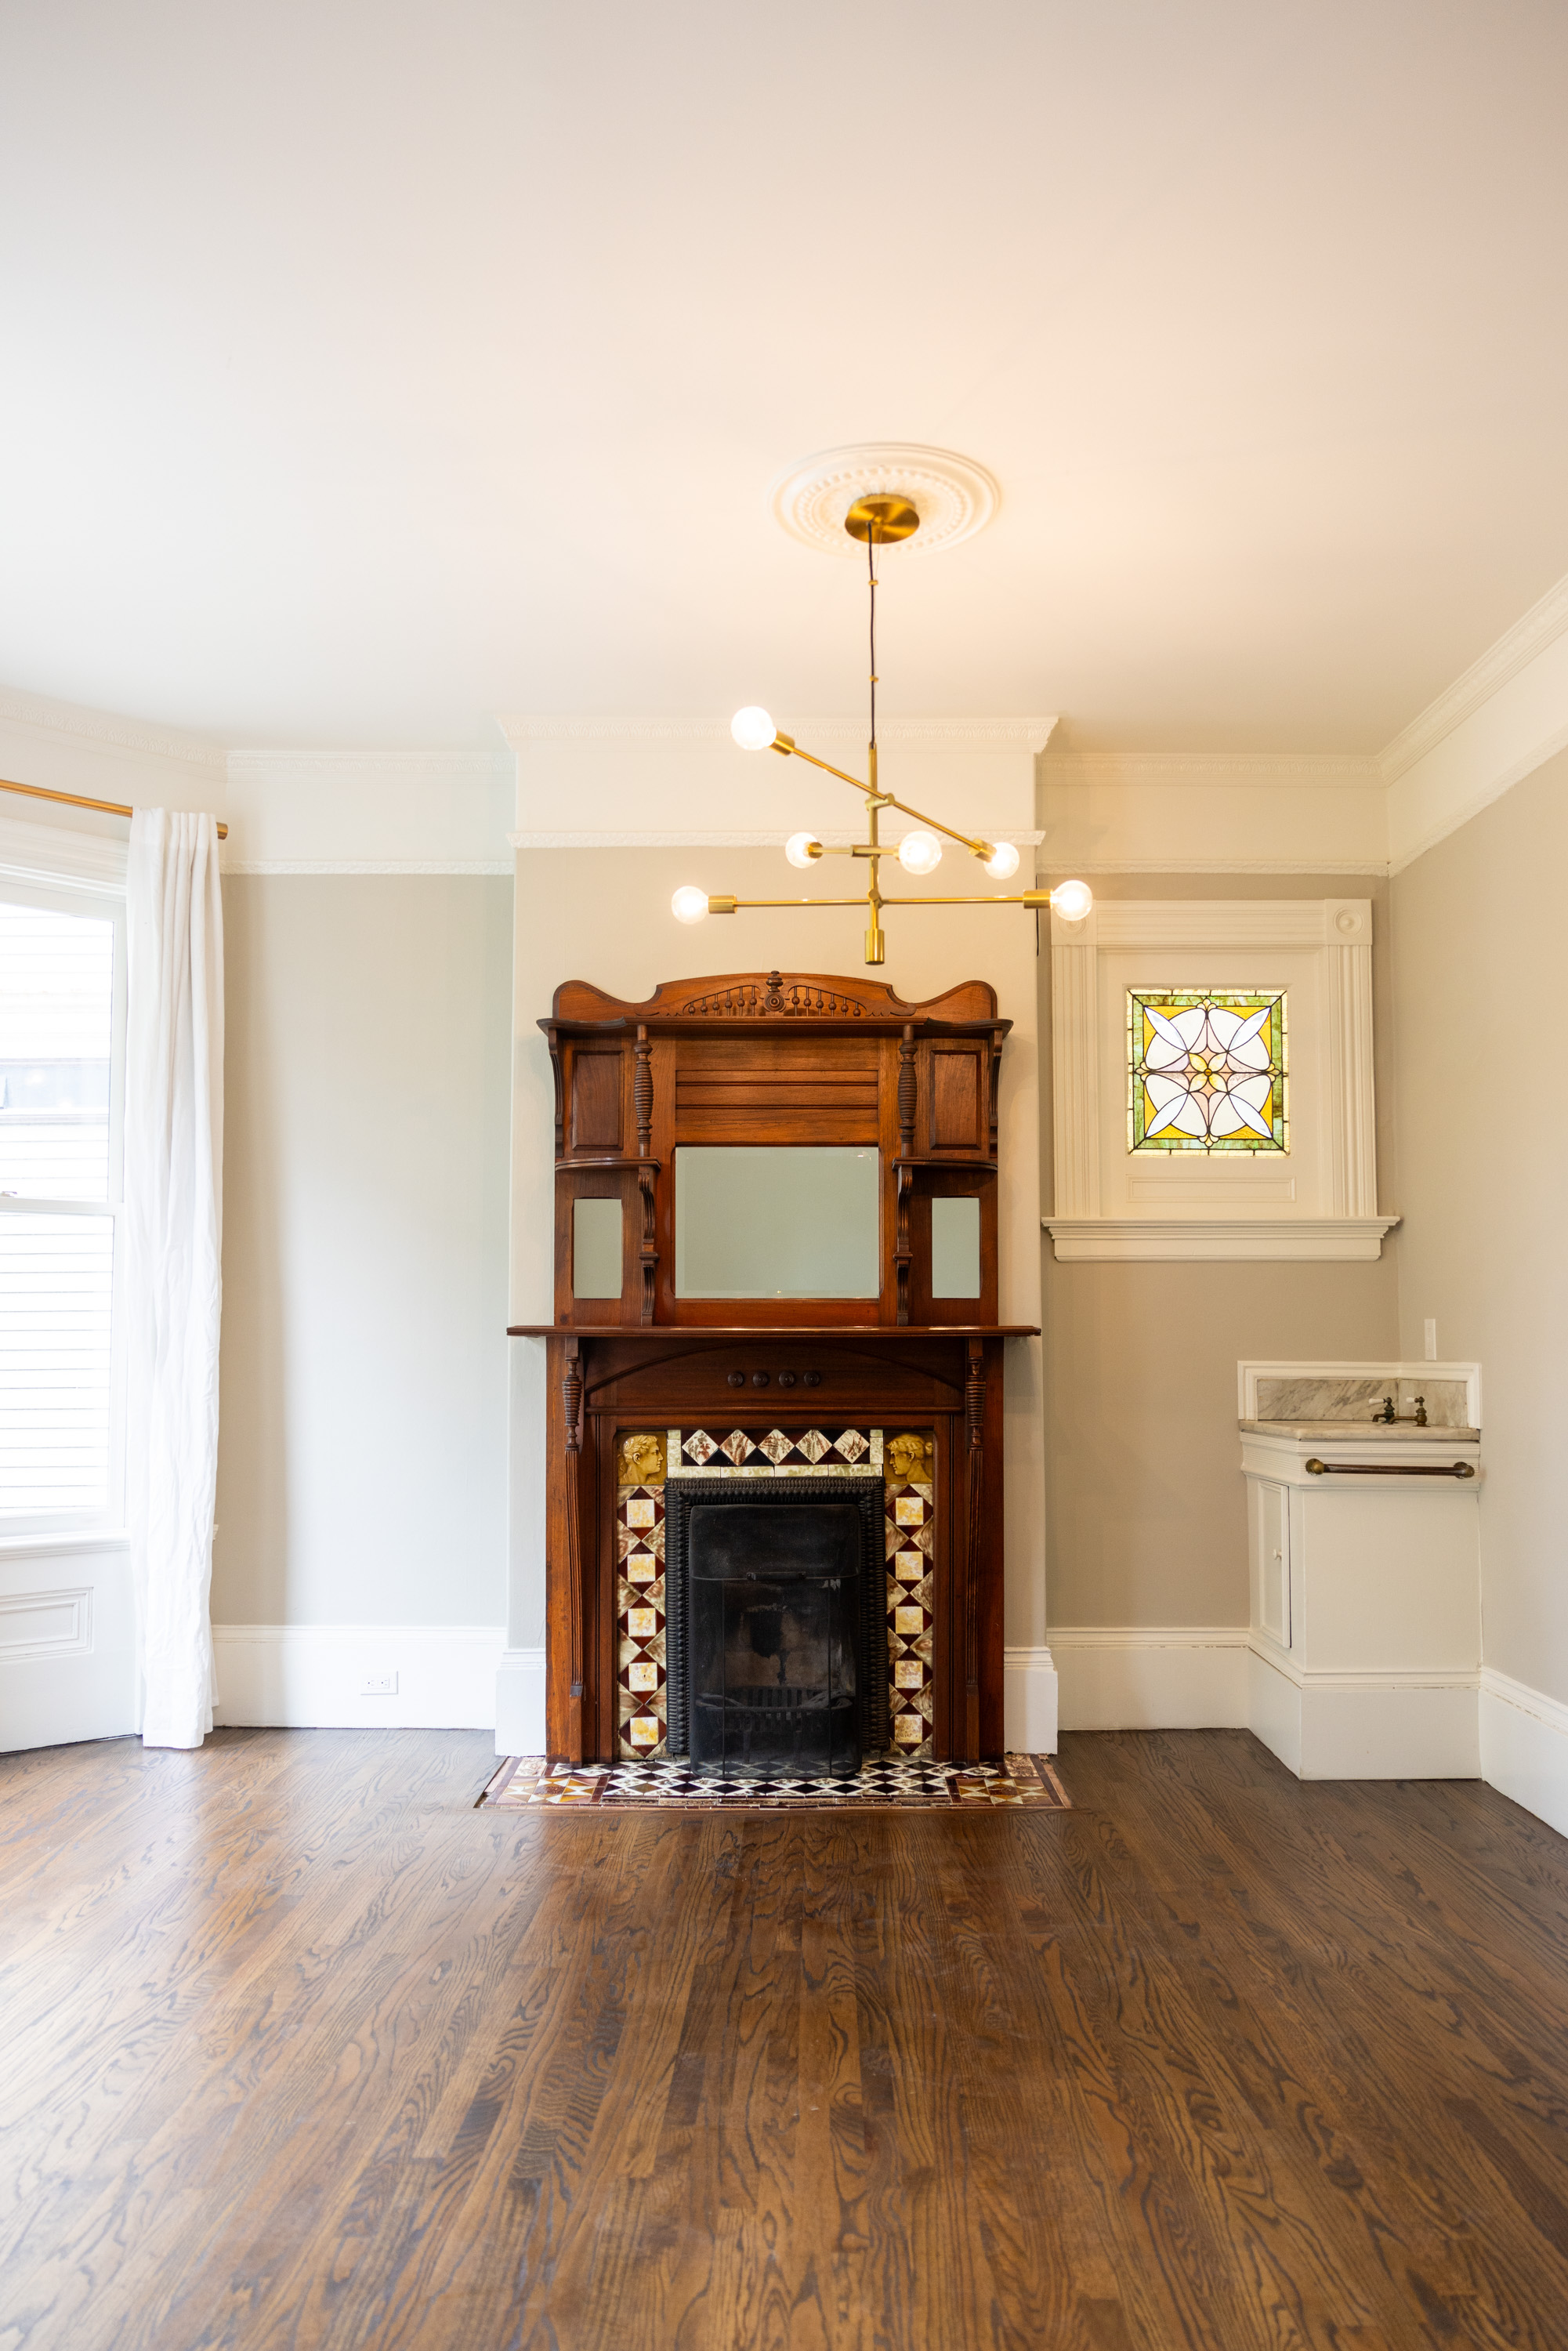 The image shows a room with wooden floors, a decorative wooden fireplace with an ornate mirror, a modern chandelier, stained glass window, and a small white sink unit.